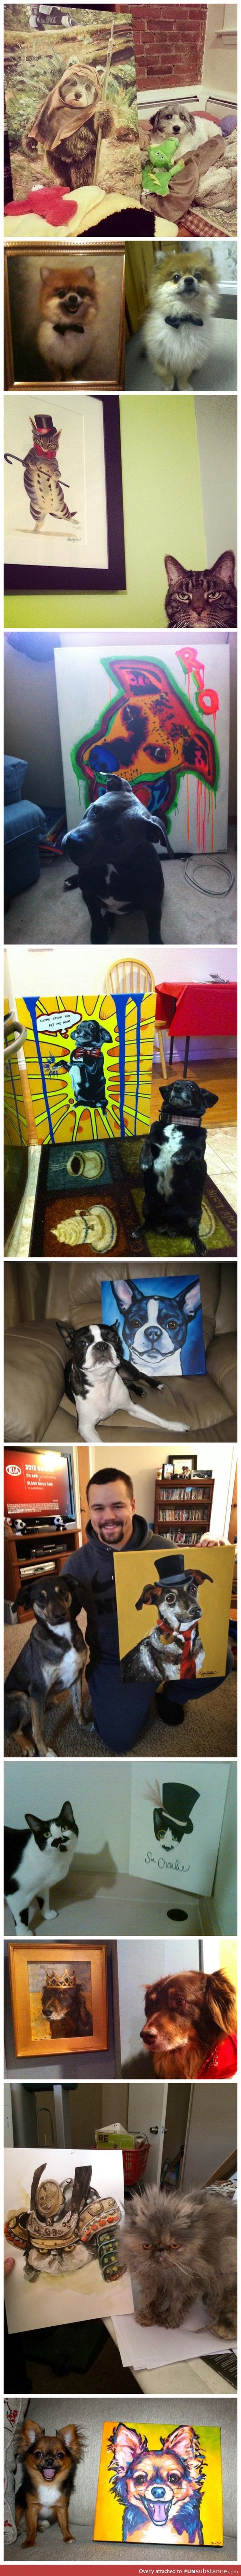 Animals Posing With Portraits of Themselves